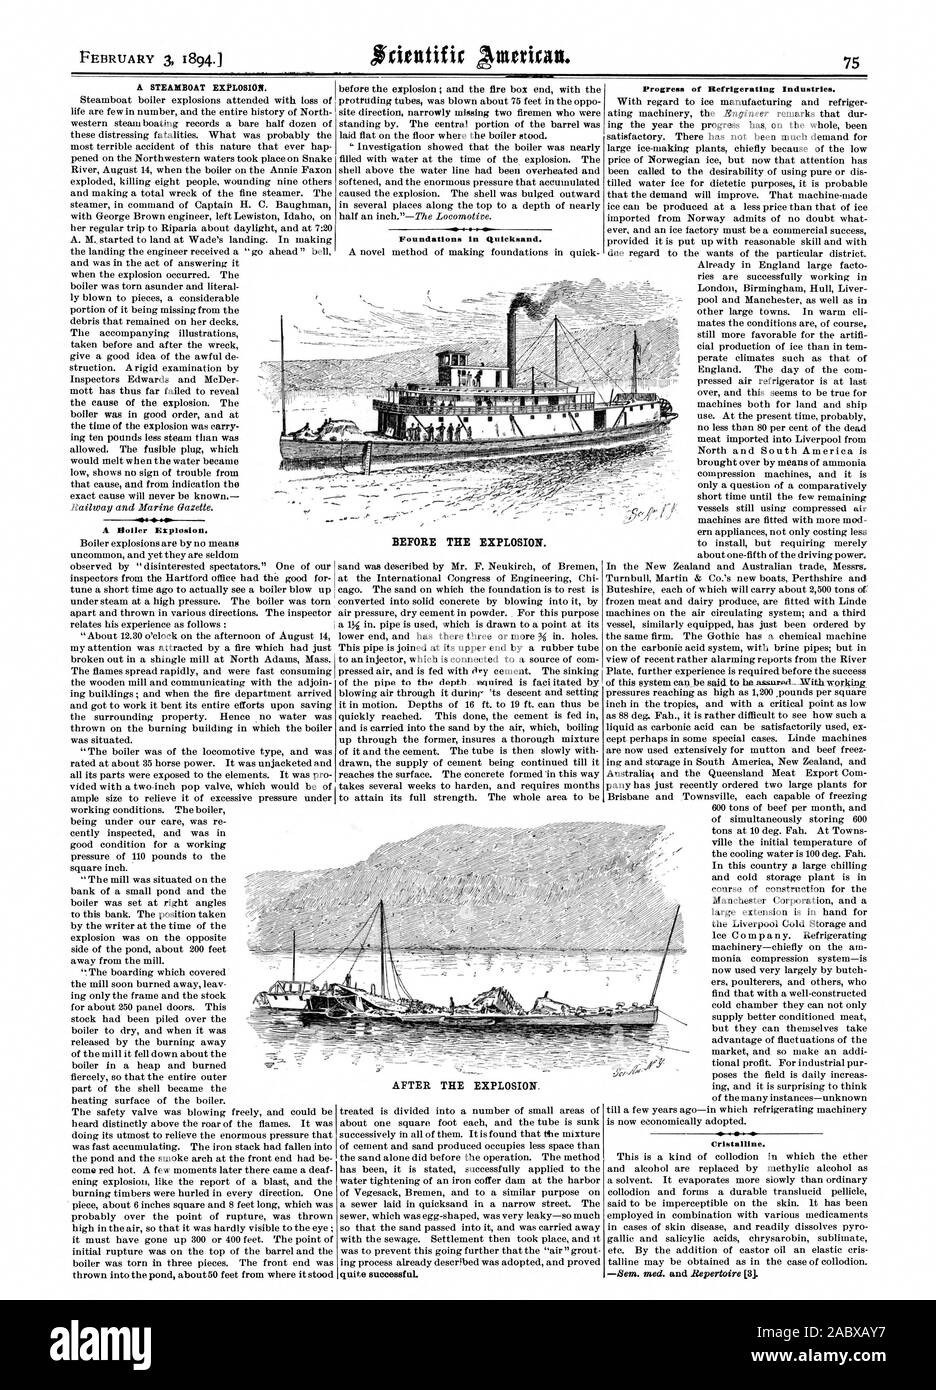 A STEAMBOAT EXPLOSION. Foundations in Quicksand. BEFORE THE EXPLOSION. Progress of Refrigerating Industries. Cristalline., scientific american, 1894-02-03 Stock Photo